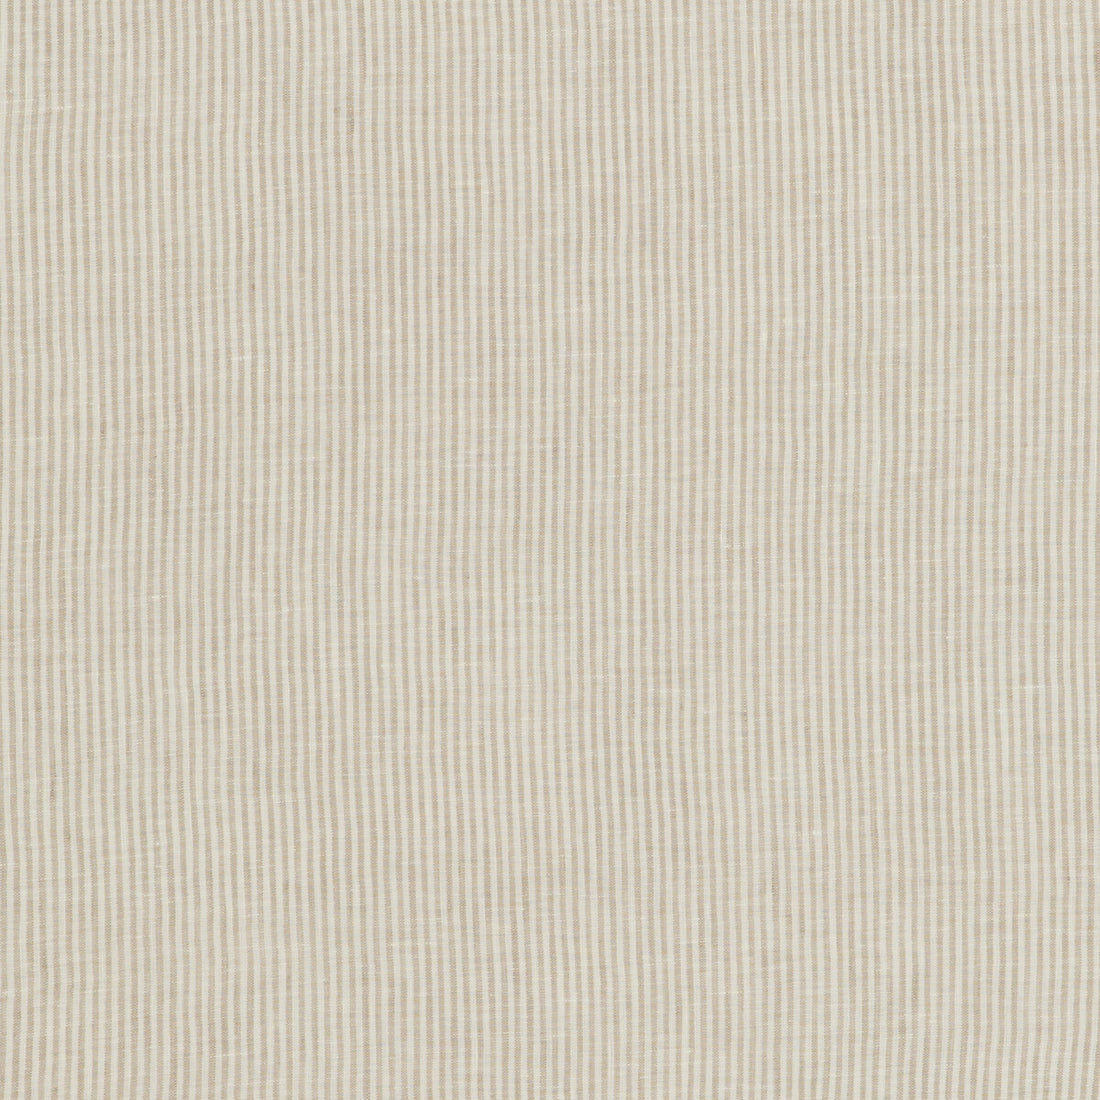 Nala Ticking fabric in linen color - pattern ED85331.110.0 - by Threads in the Nala Linens collection